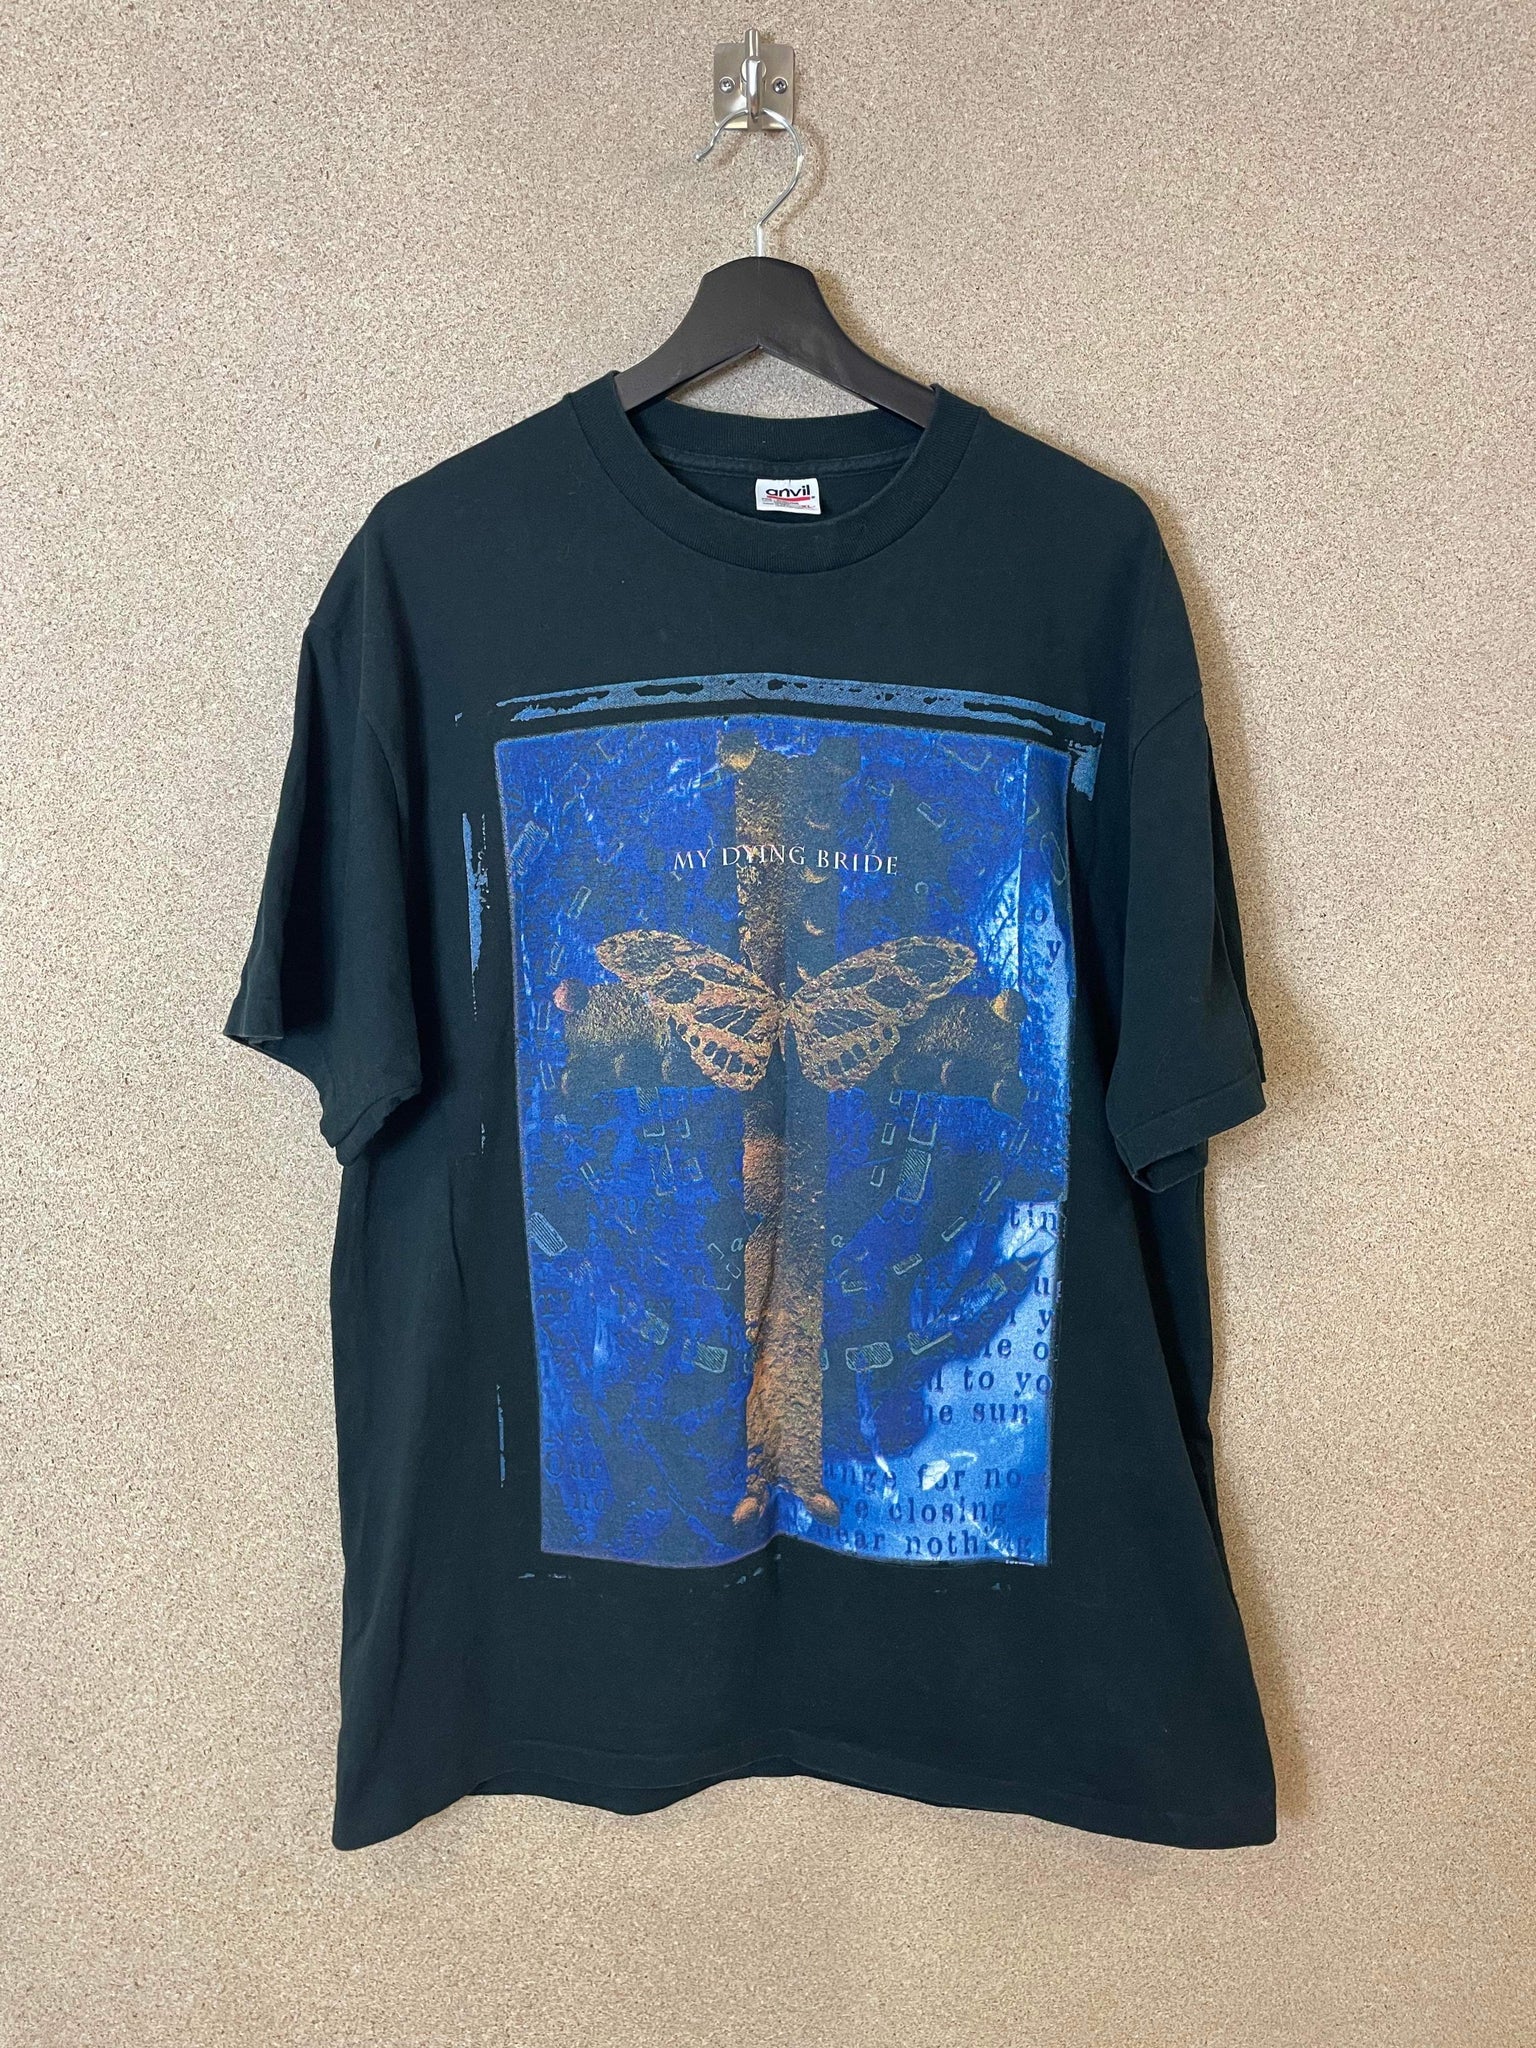 Vintage My Dying Bride Like Gods of The Sun 90s Tee - XL